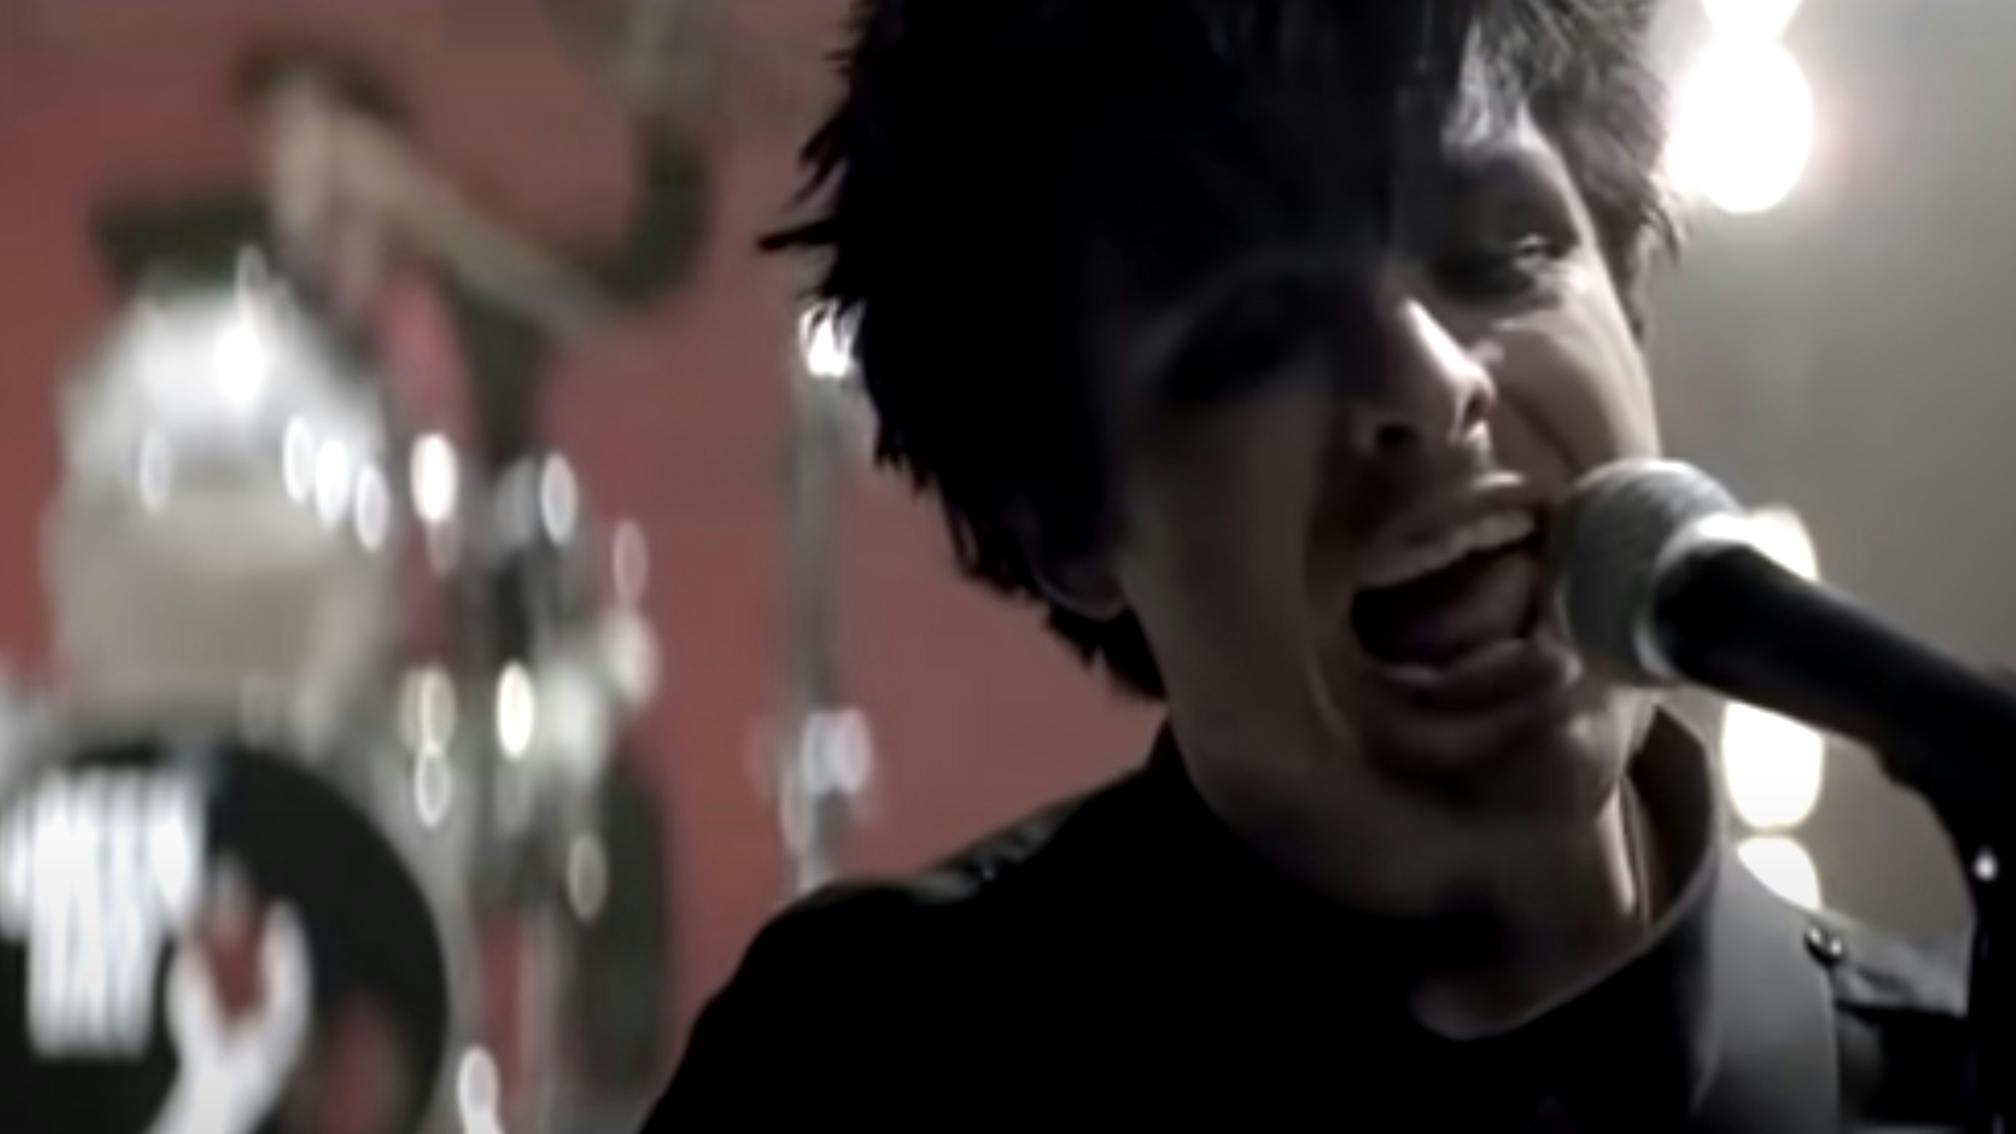 Green Day fans remind the internet not to post Wake Me Up When September Ends jokes